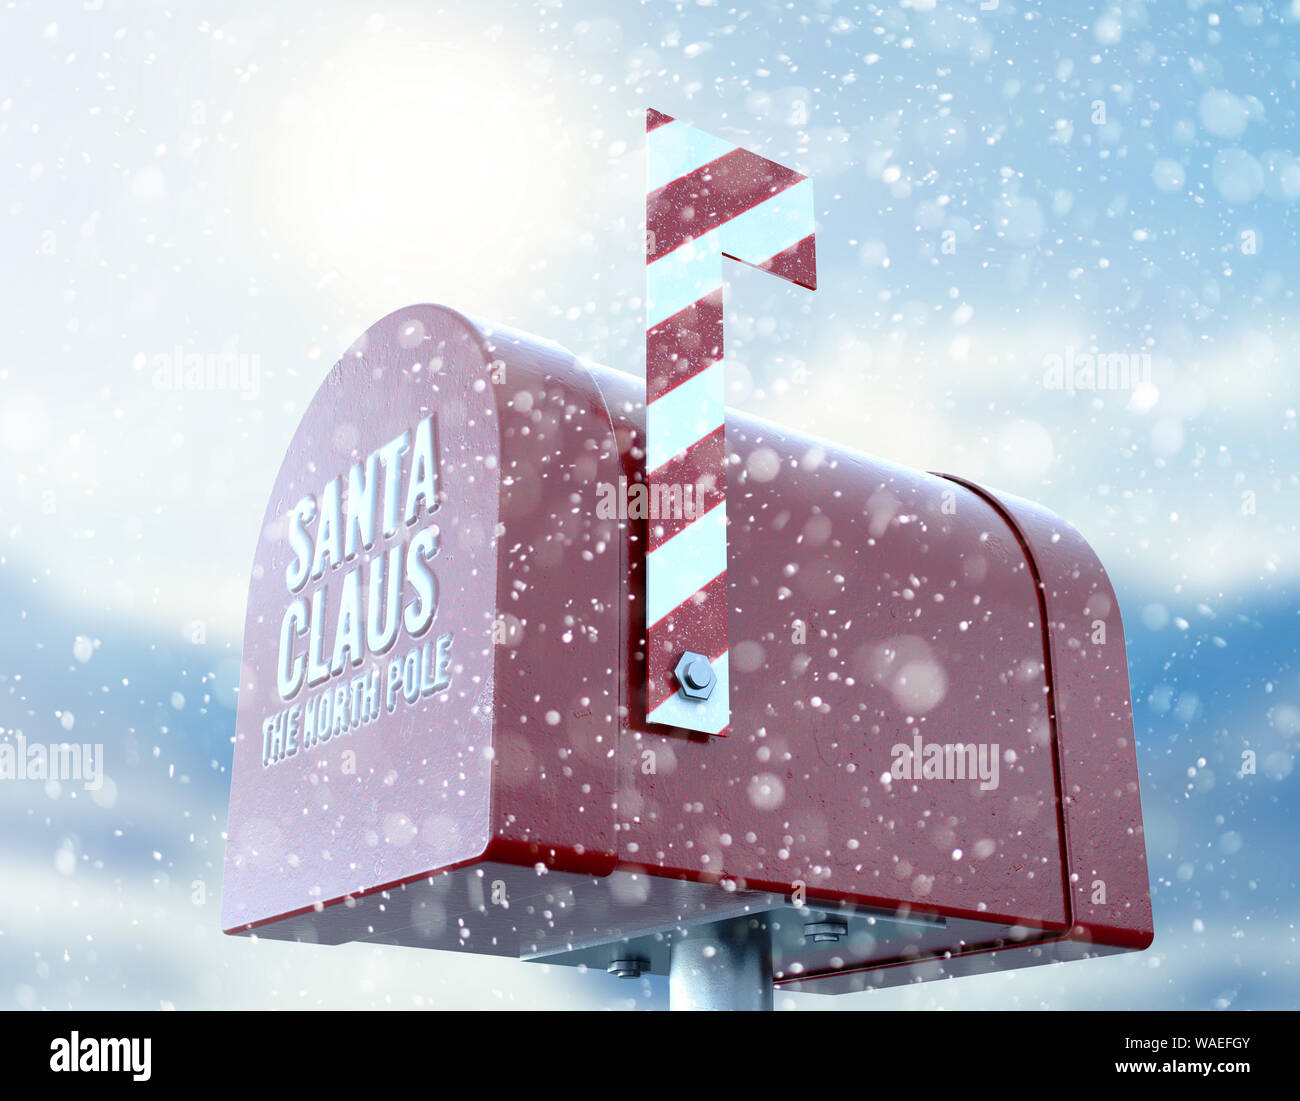 A christmas concept depicting a shut red retro mailbox belonging to santa clause with a striped candy cane flag on a snowy cold background - 3D render Stock Photo